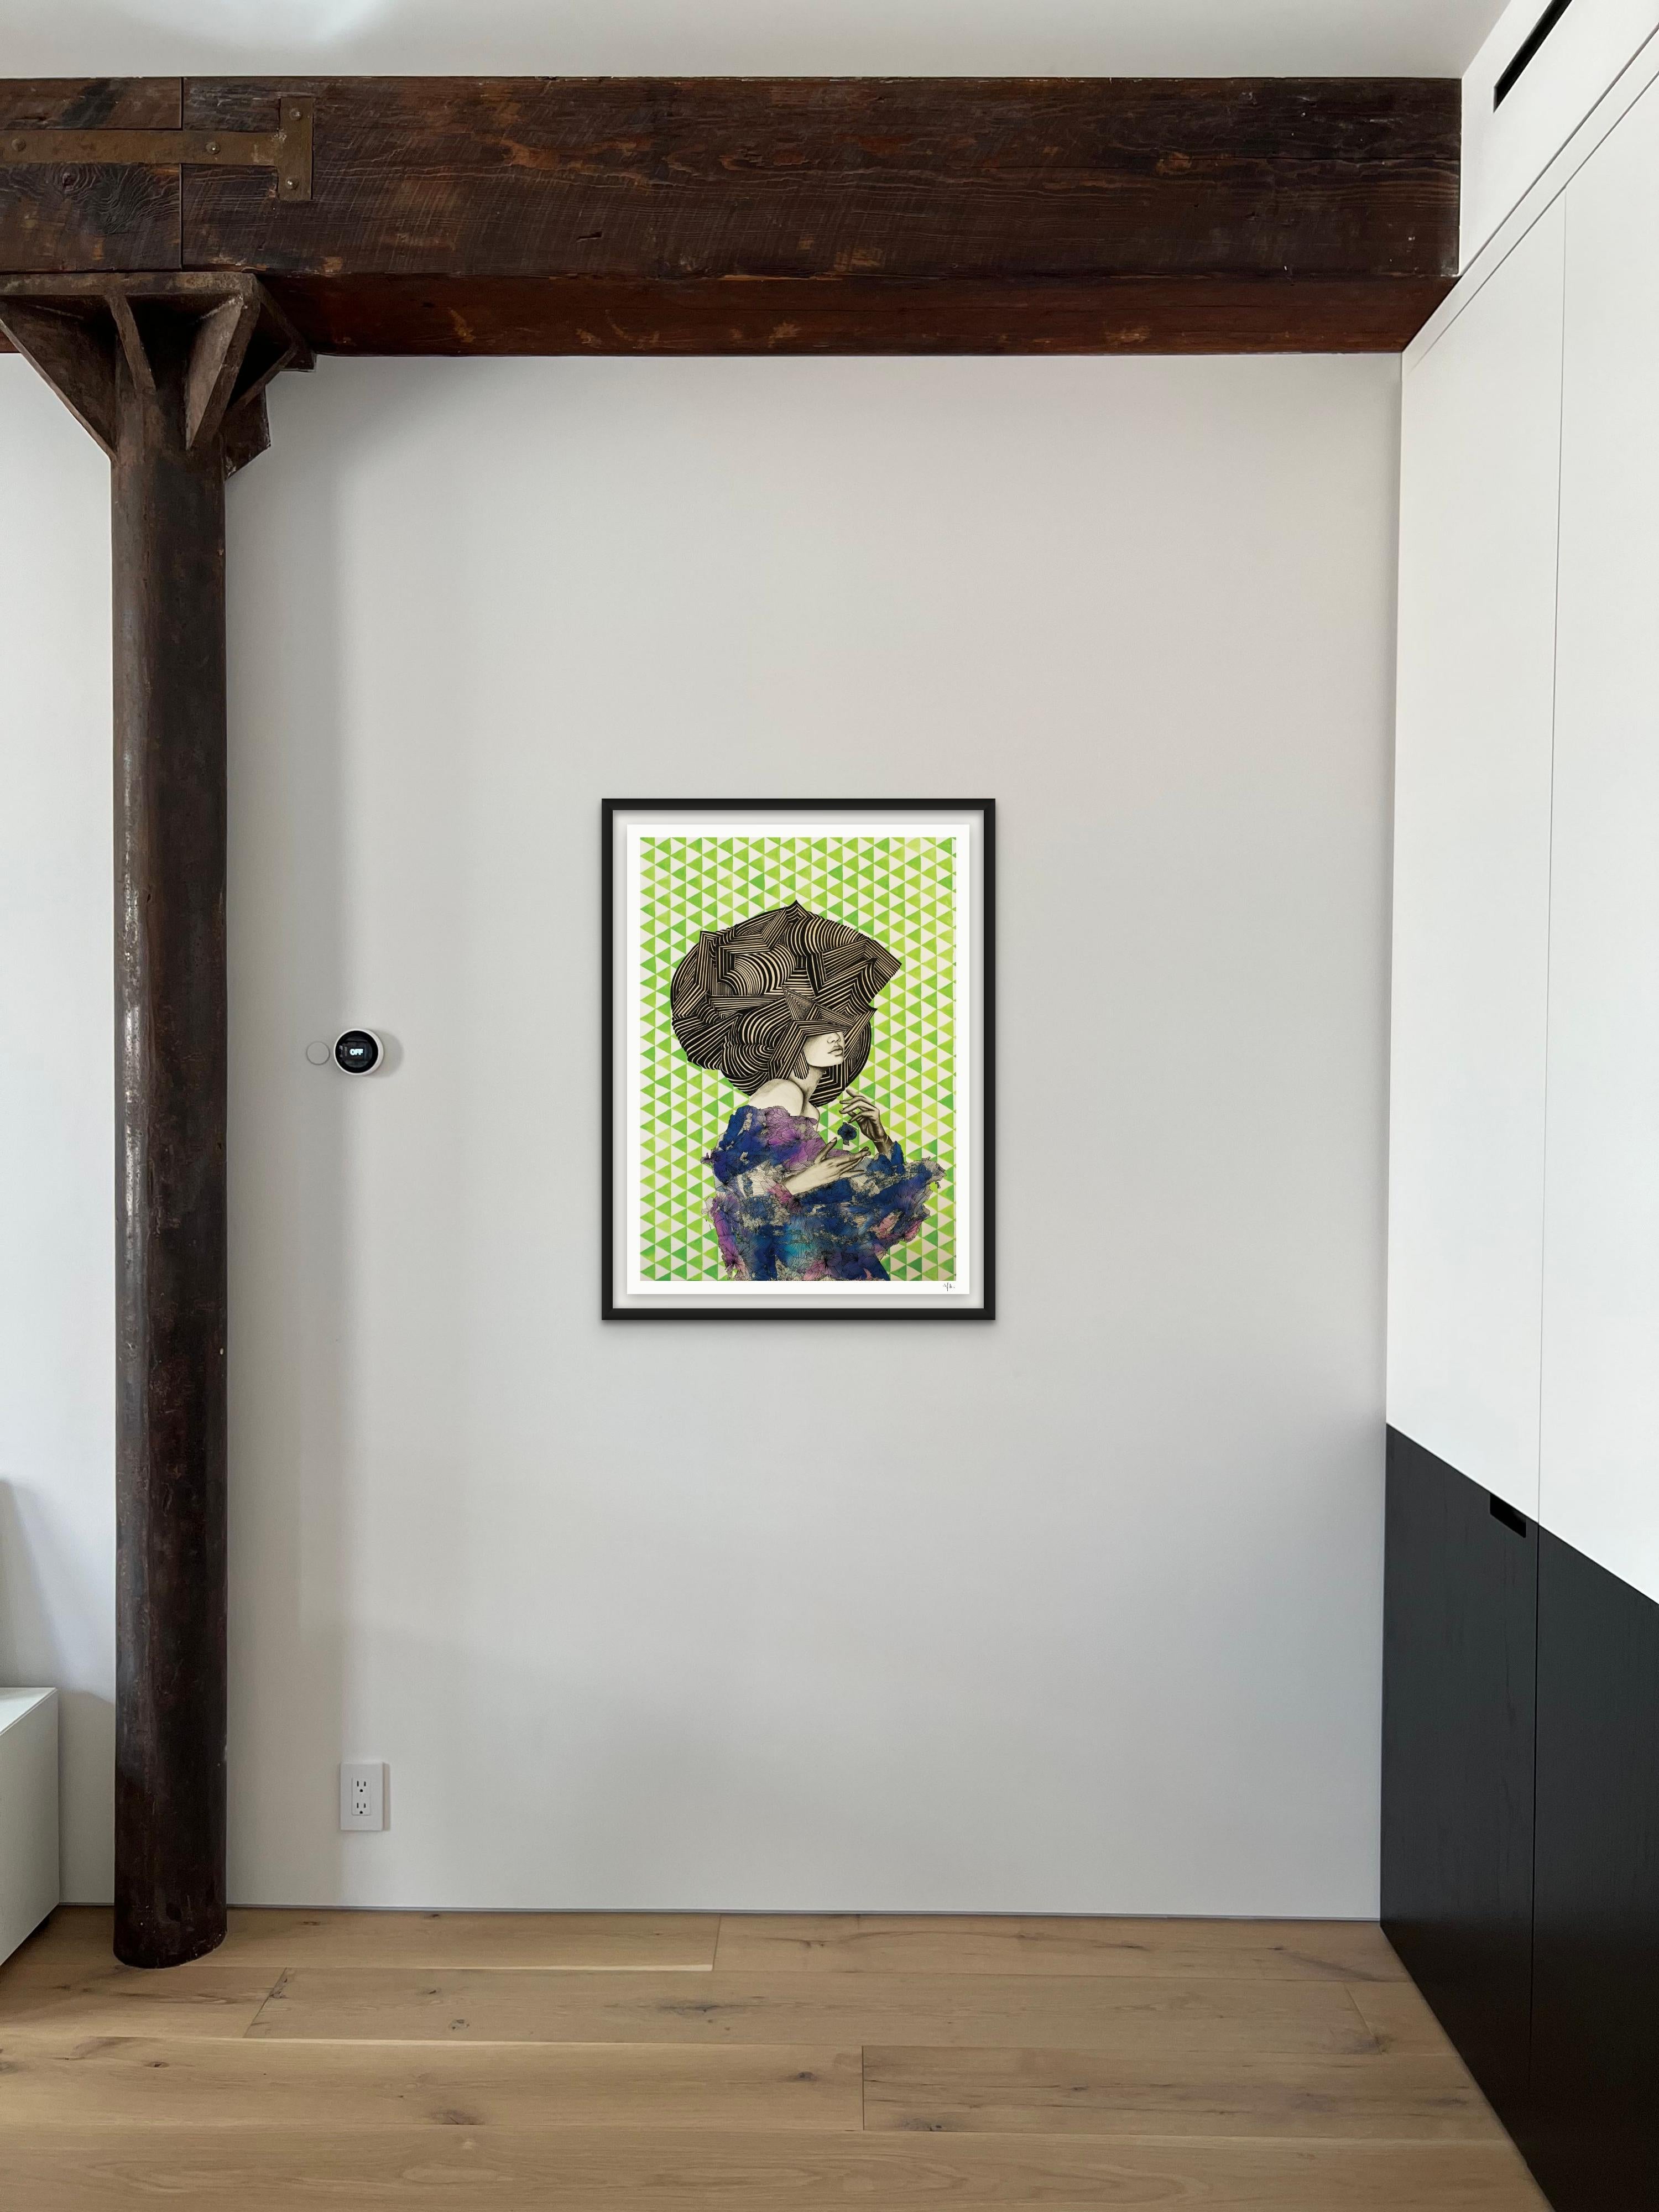 Archival Pigment Print., Signed by Facsimile.
Available in White, Black & Natural frame.
Edition of 10: 26in x 36 in Paper Size
 
About the Artwork:
Lela Brunet is an Atlanta, Georgia based artist whose work explores the contrast created when the